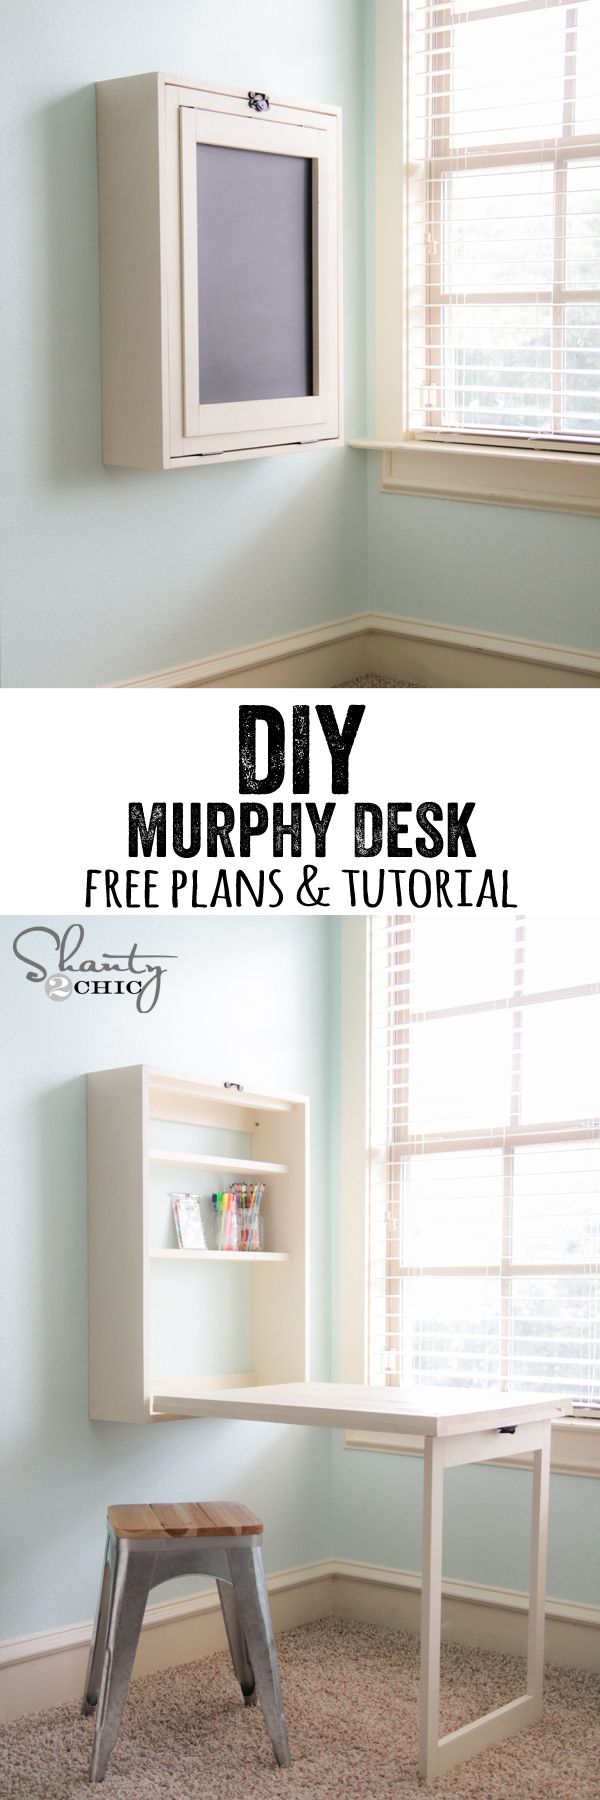 Free DIY Furniture Project Plan from Shanty2Chic: Learn How to Build a Murphy De...